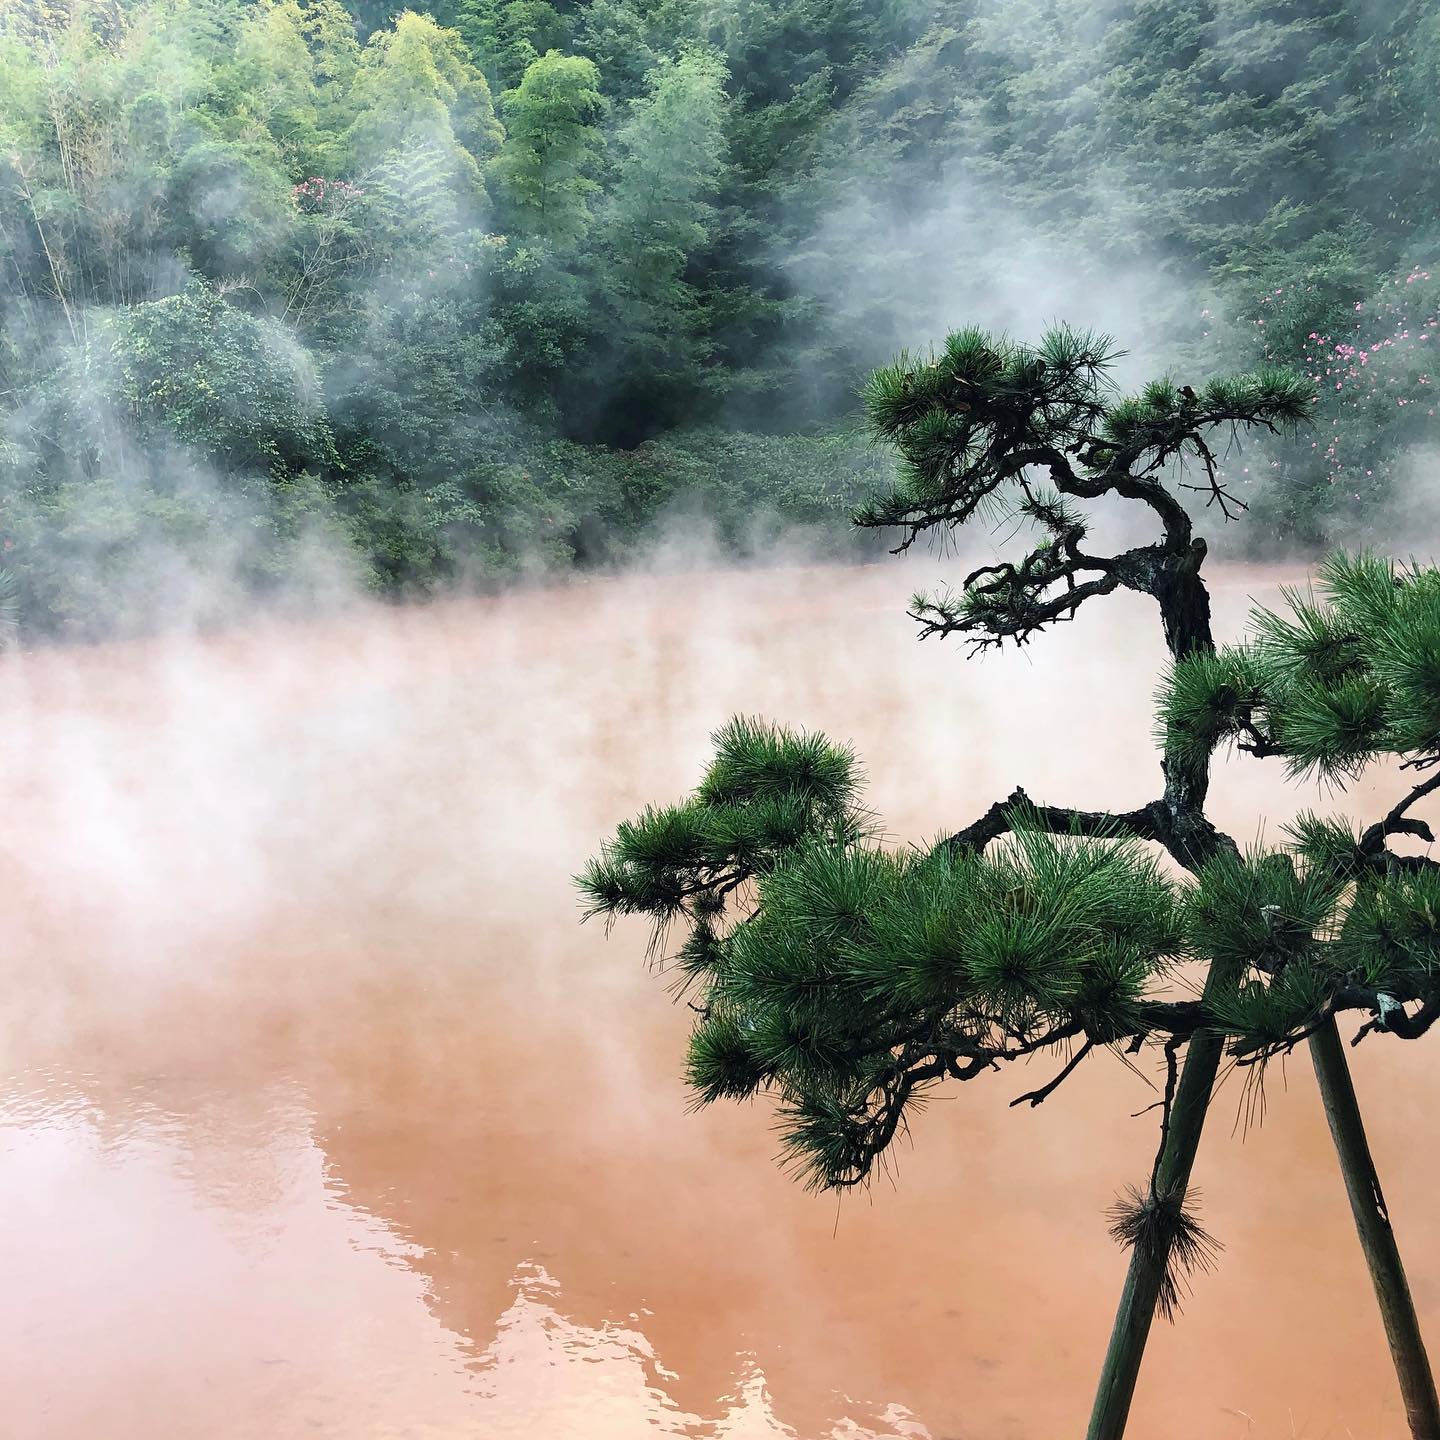 _⁣
Here’s this week’s from AOI Global at Chinoike Jigoku in Beppu, Oita Prefecture. ⁣

Chinoike Jigoku (which translates to “Blood-pond Hell”) is one of the hot springs (onsen) found in Beppu city, a famous hot spring district. The naturally occurring vivid red color comes from the minerals and iron in the rocks. The water is too hot to fully bathe in, however, you can enjoy a nice foot bath.

#weeklyinspiration﻿ #remoteshooting⁣